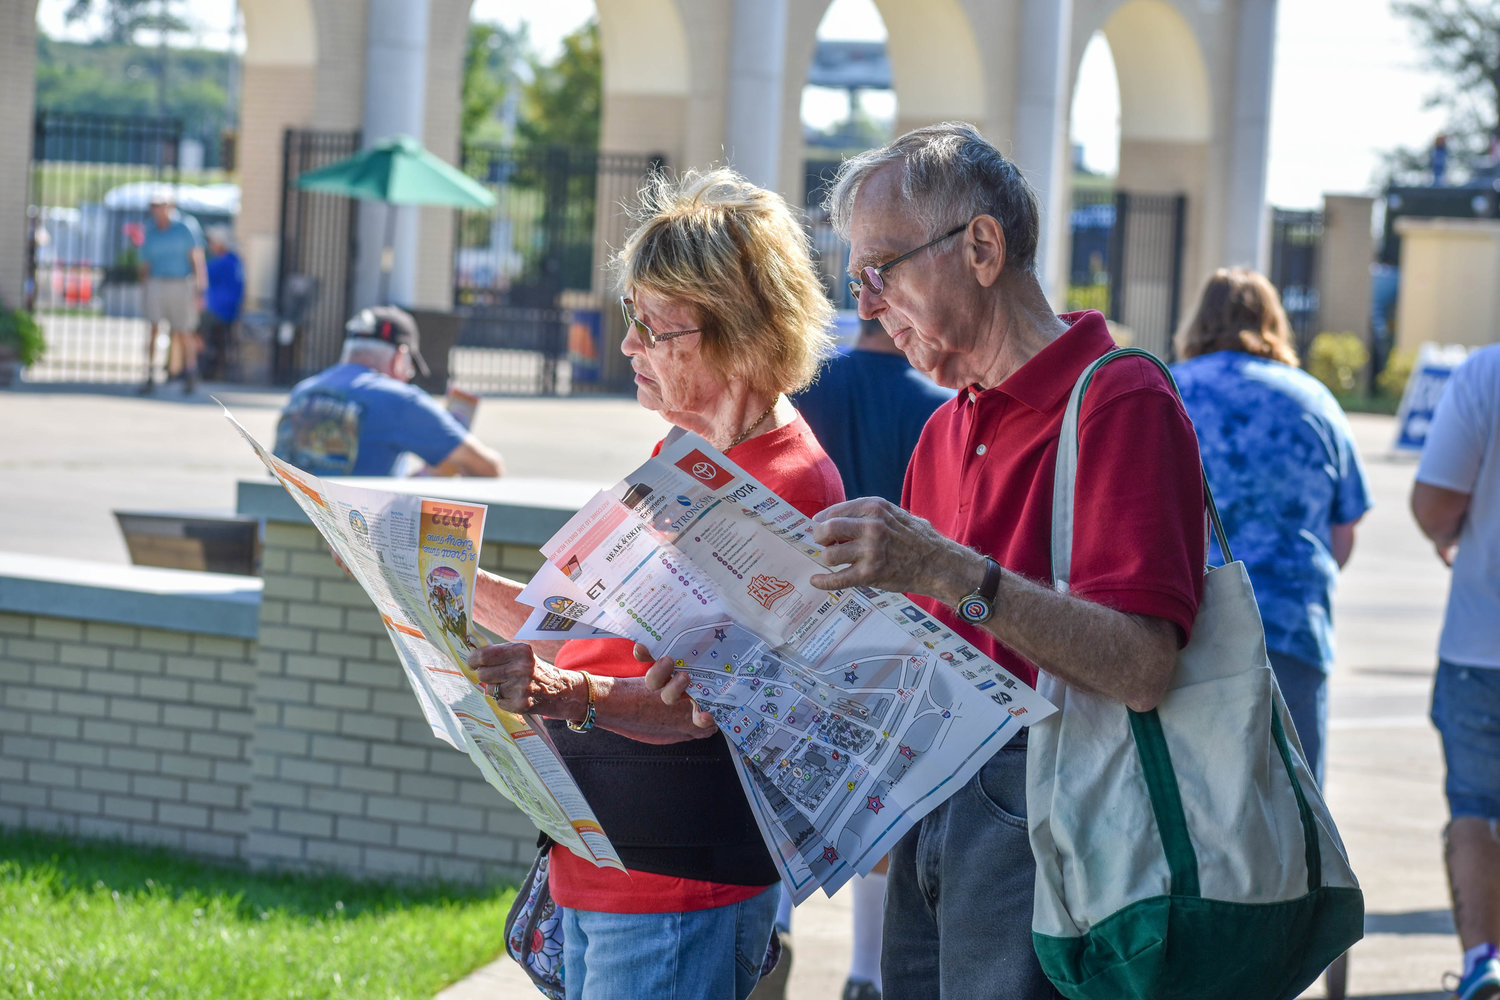 Upon entering, fairgoers unravel the visitor map for the 2022 New York State Fair.